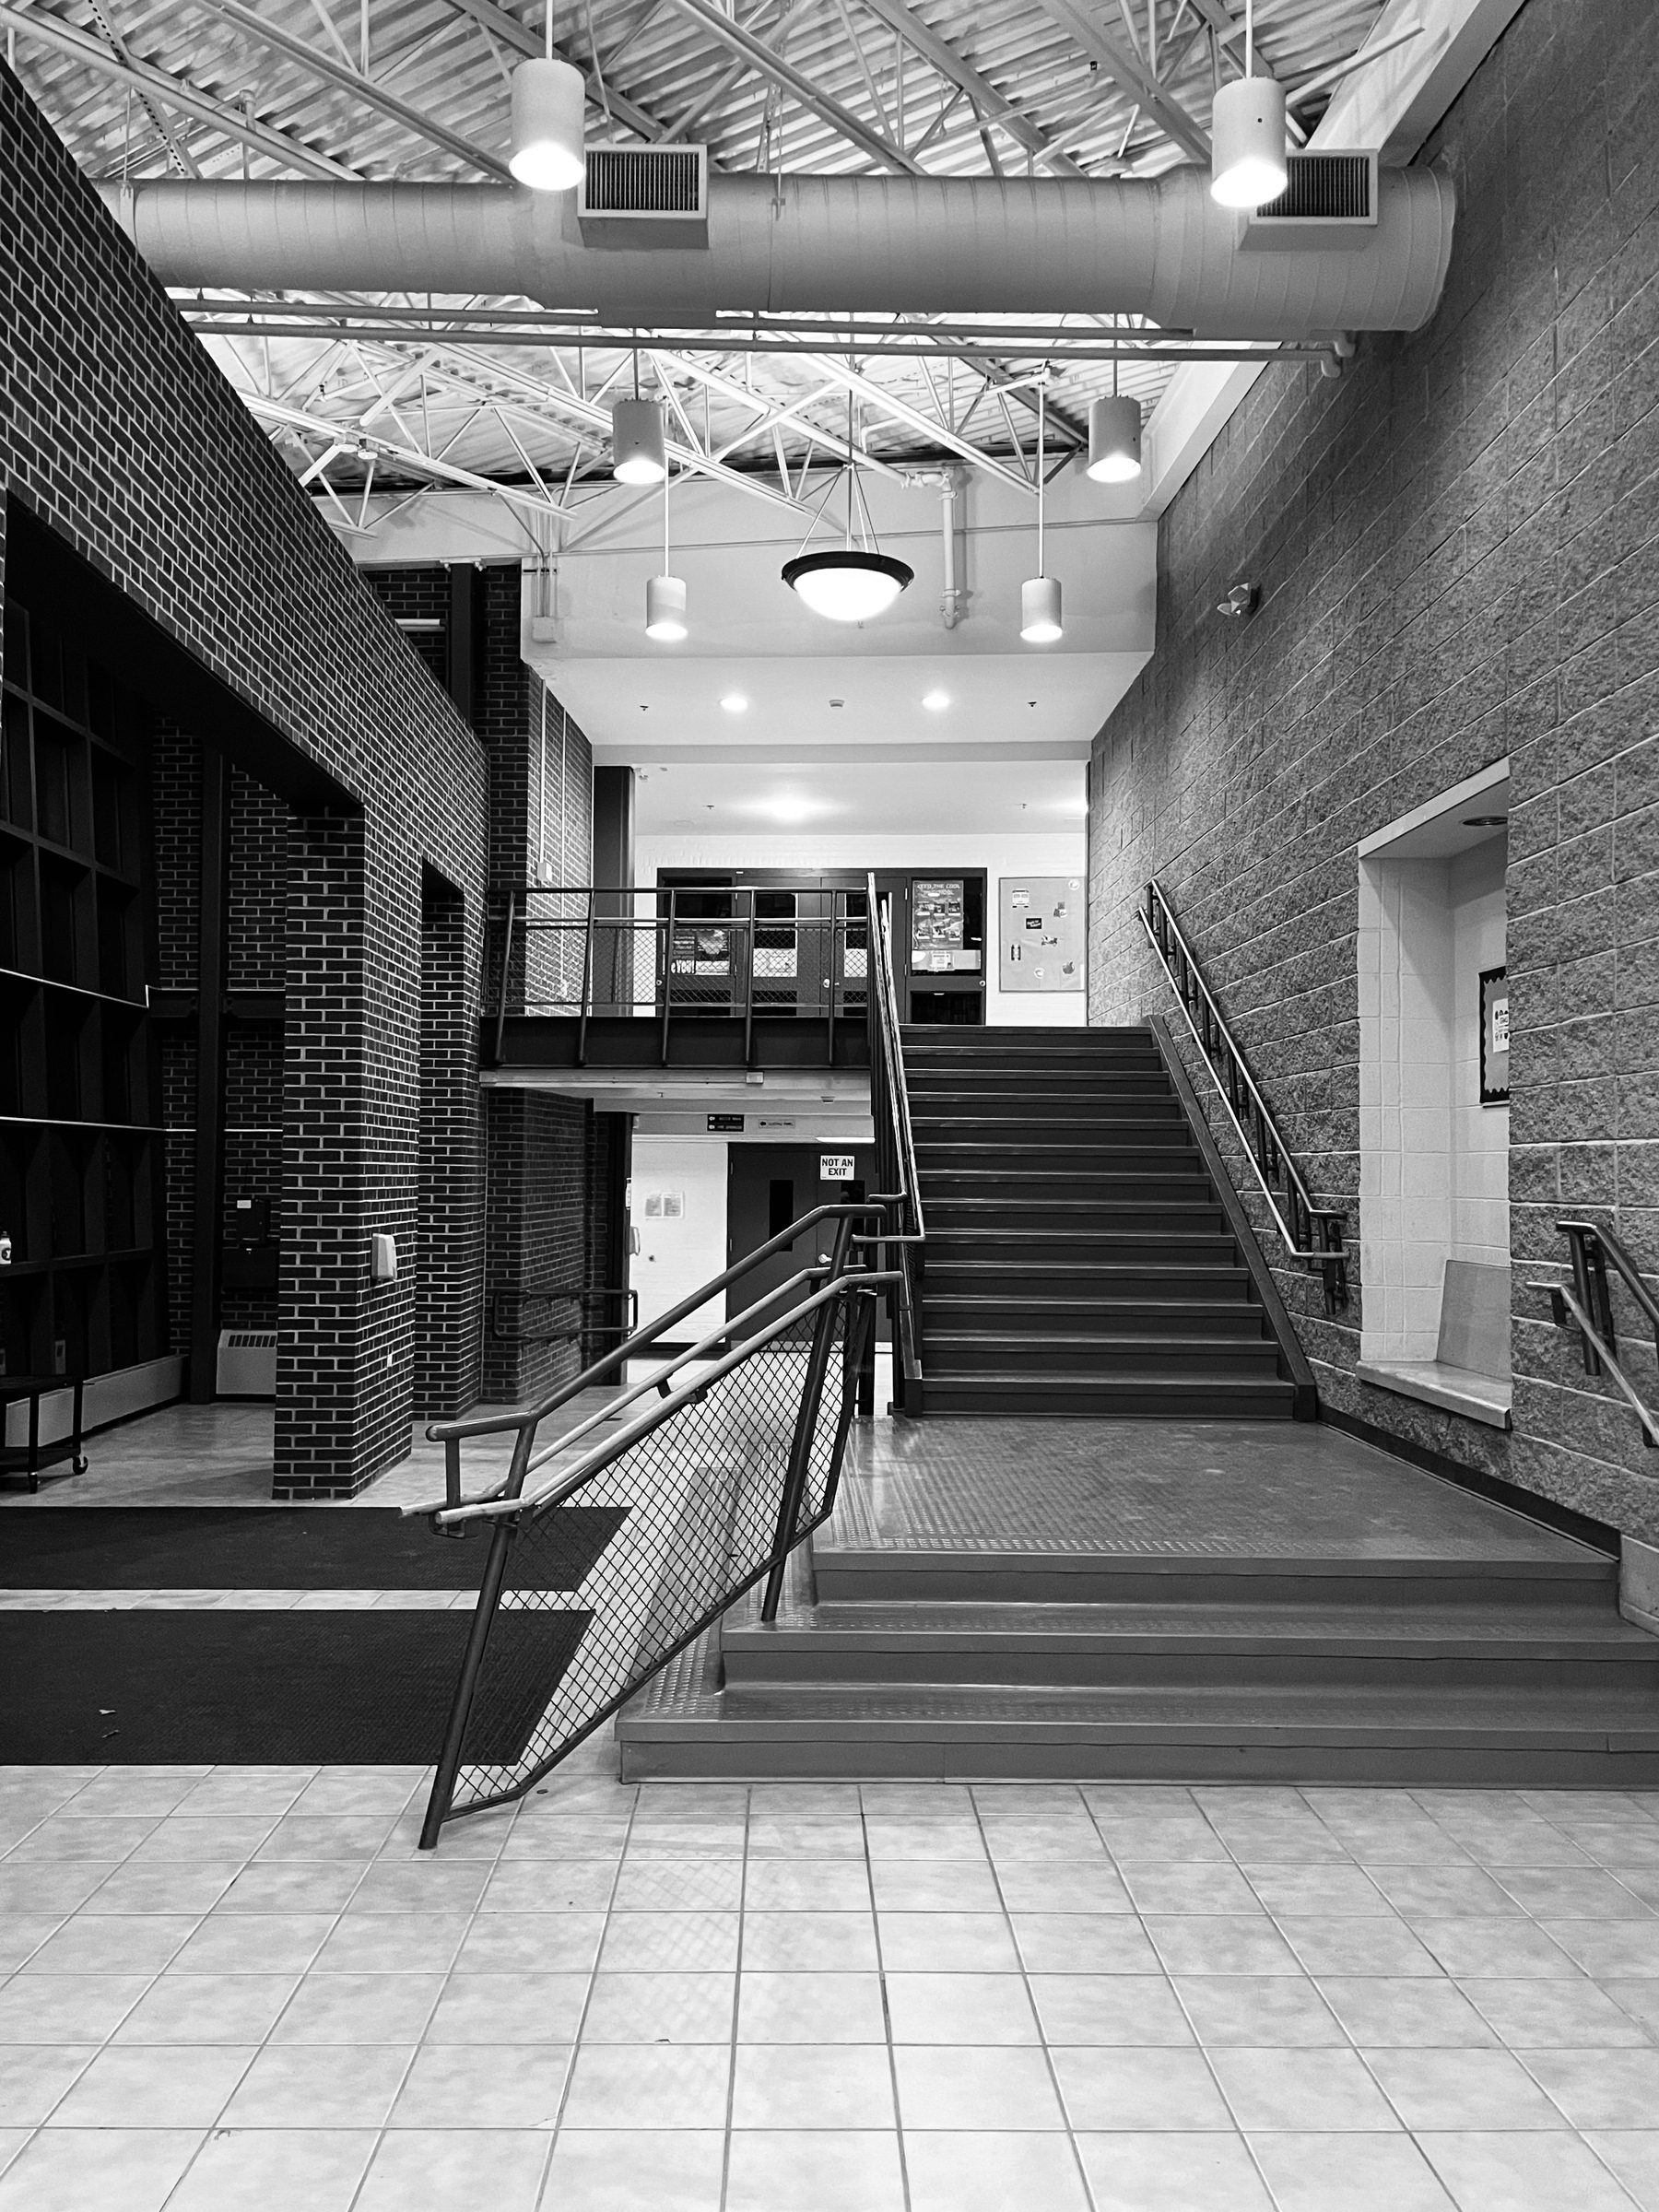 Stairs in the gym lobby at Greenfield Middle School